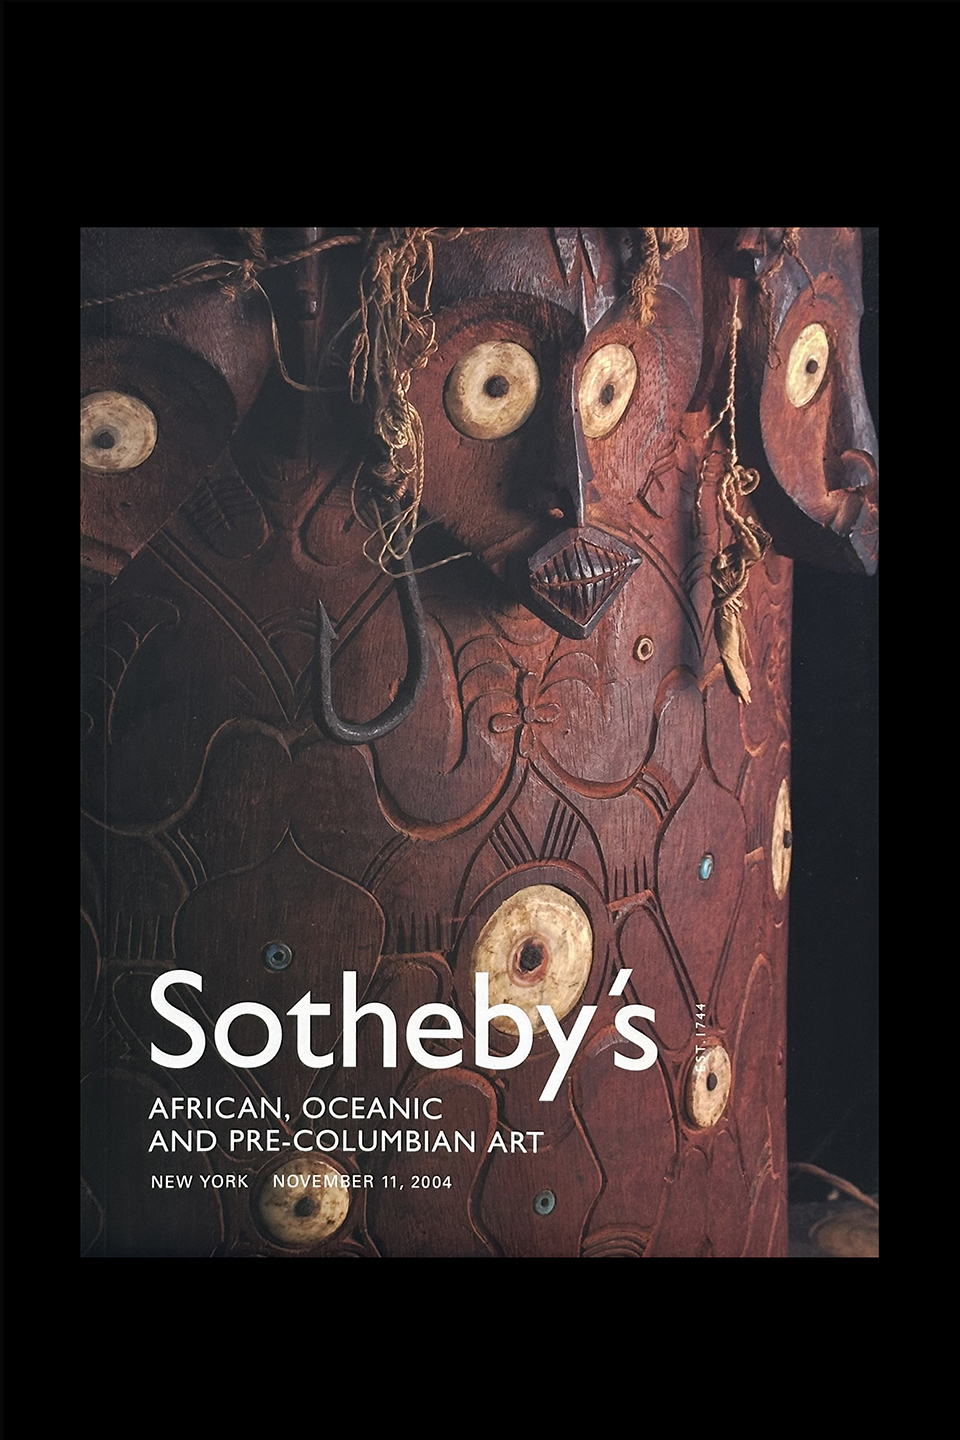 Sotheby's - African, Oceanic and Pre-Columbian Art - New York, November, 2004